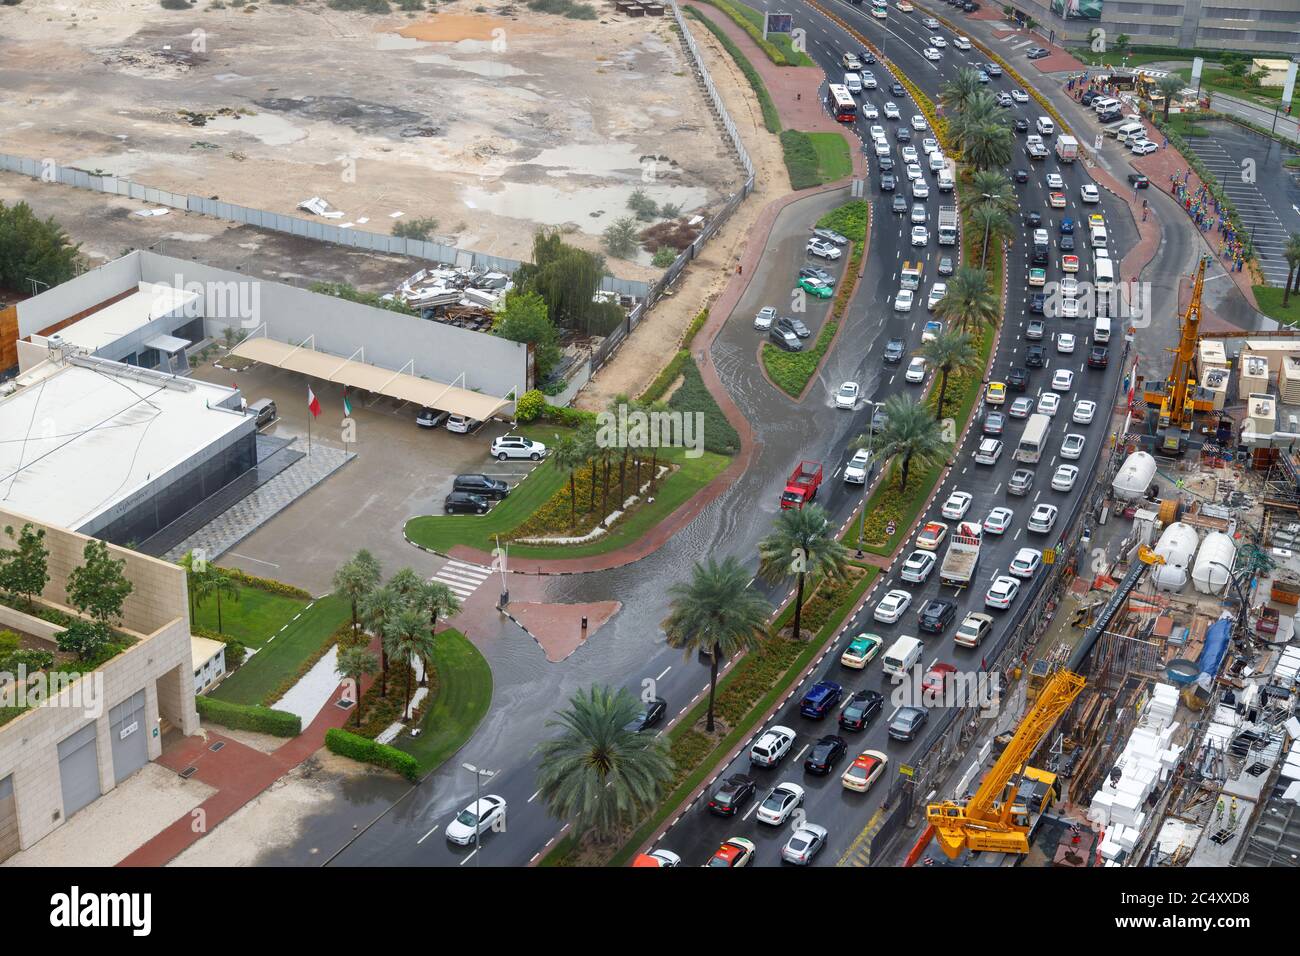 Dubai, UAE - CIRCA 2020: Big long traffic jam caused by have rains. Cars slowly crawling trough big water pods caused by storm water. Stock Photo